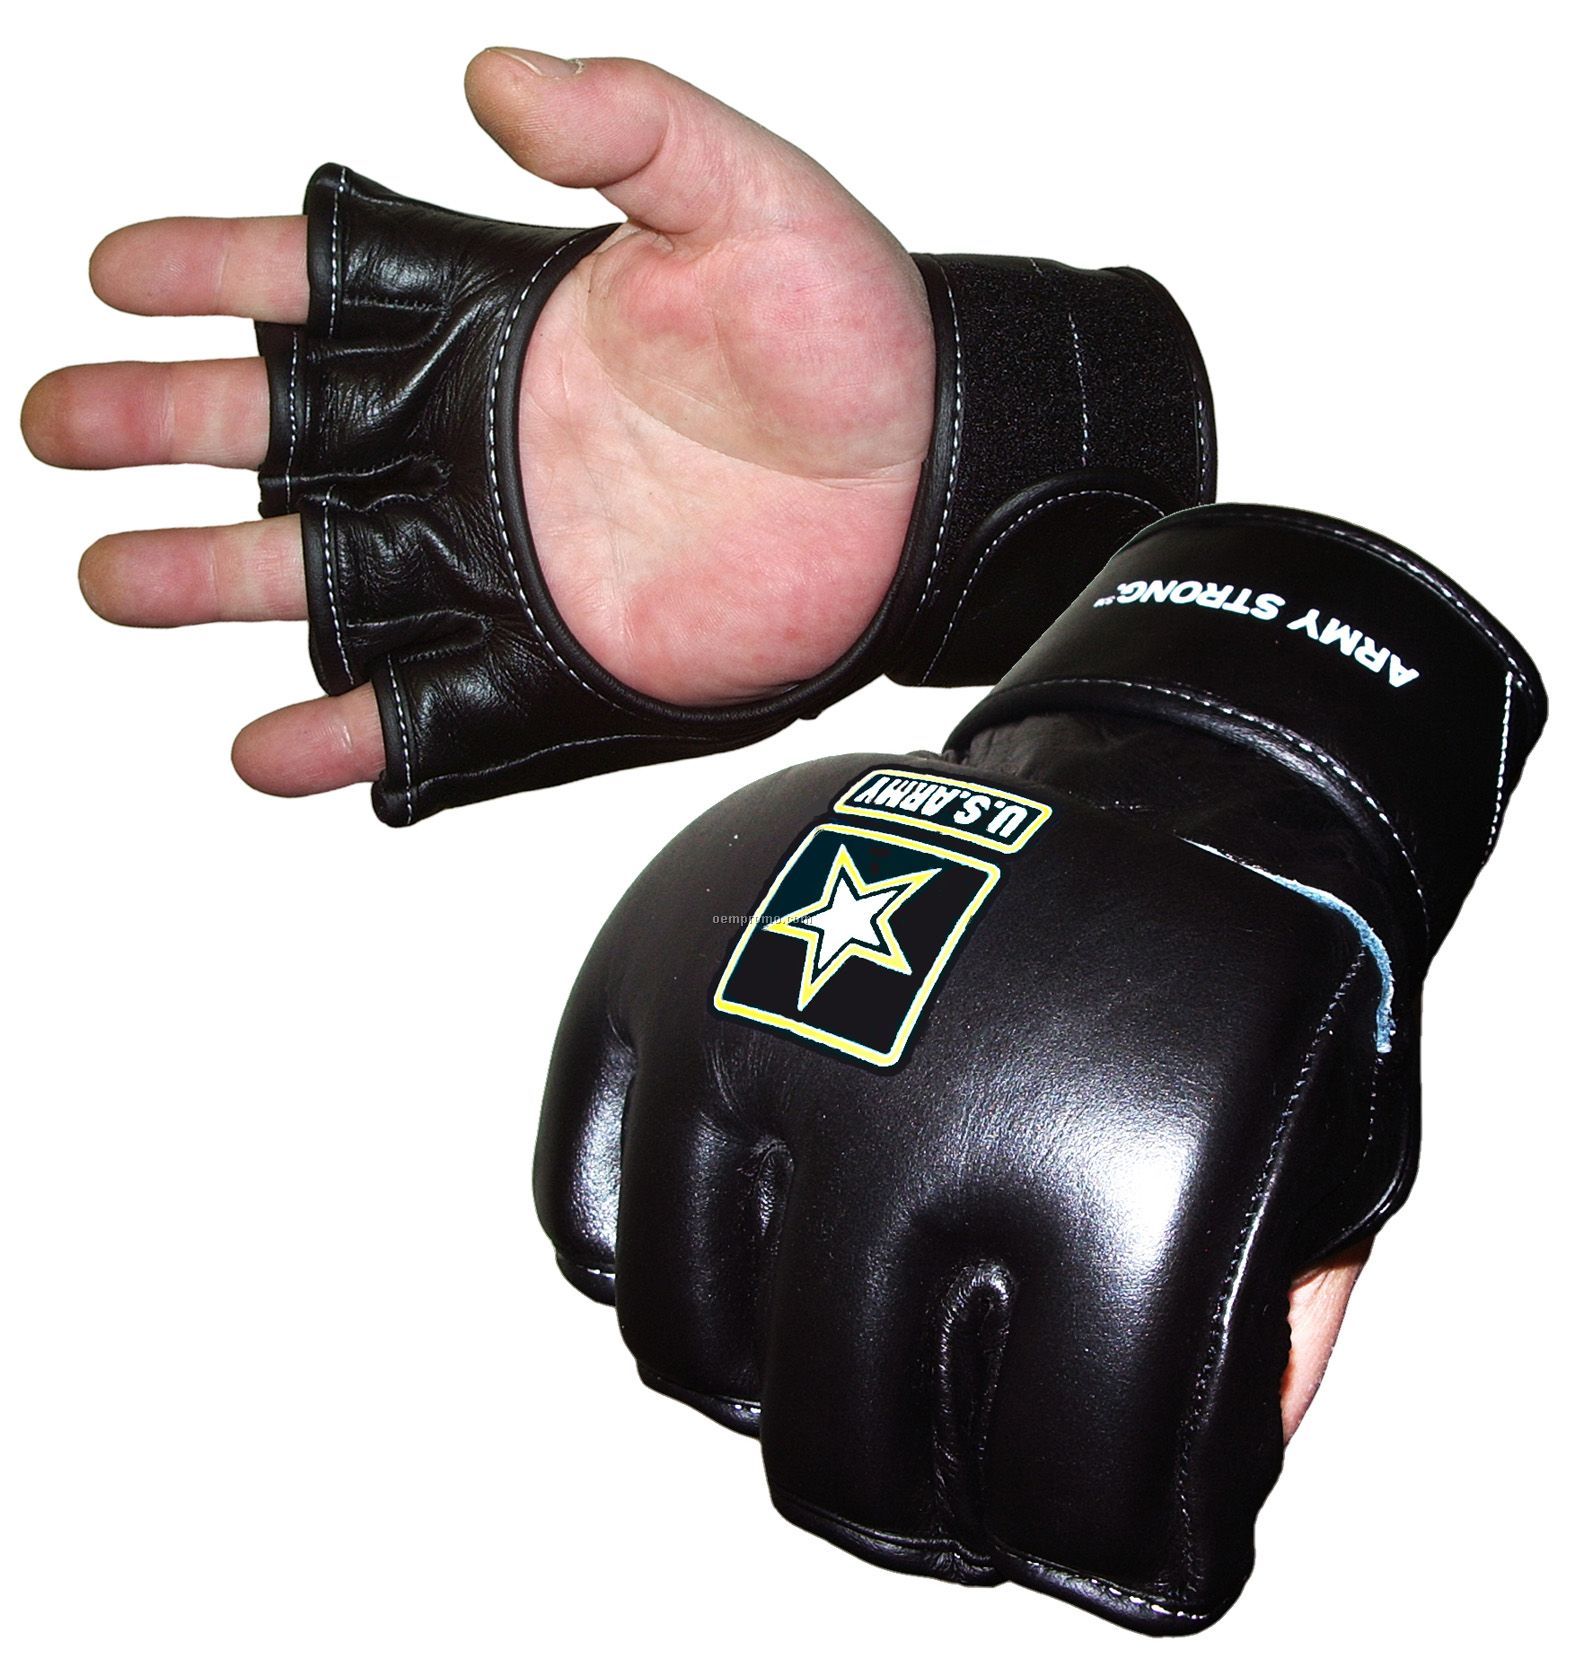 Mma Boxing Gloves, Genuine Leather,China Wholesale Mma Boxing Gloves